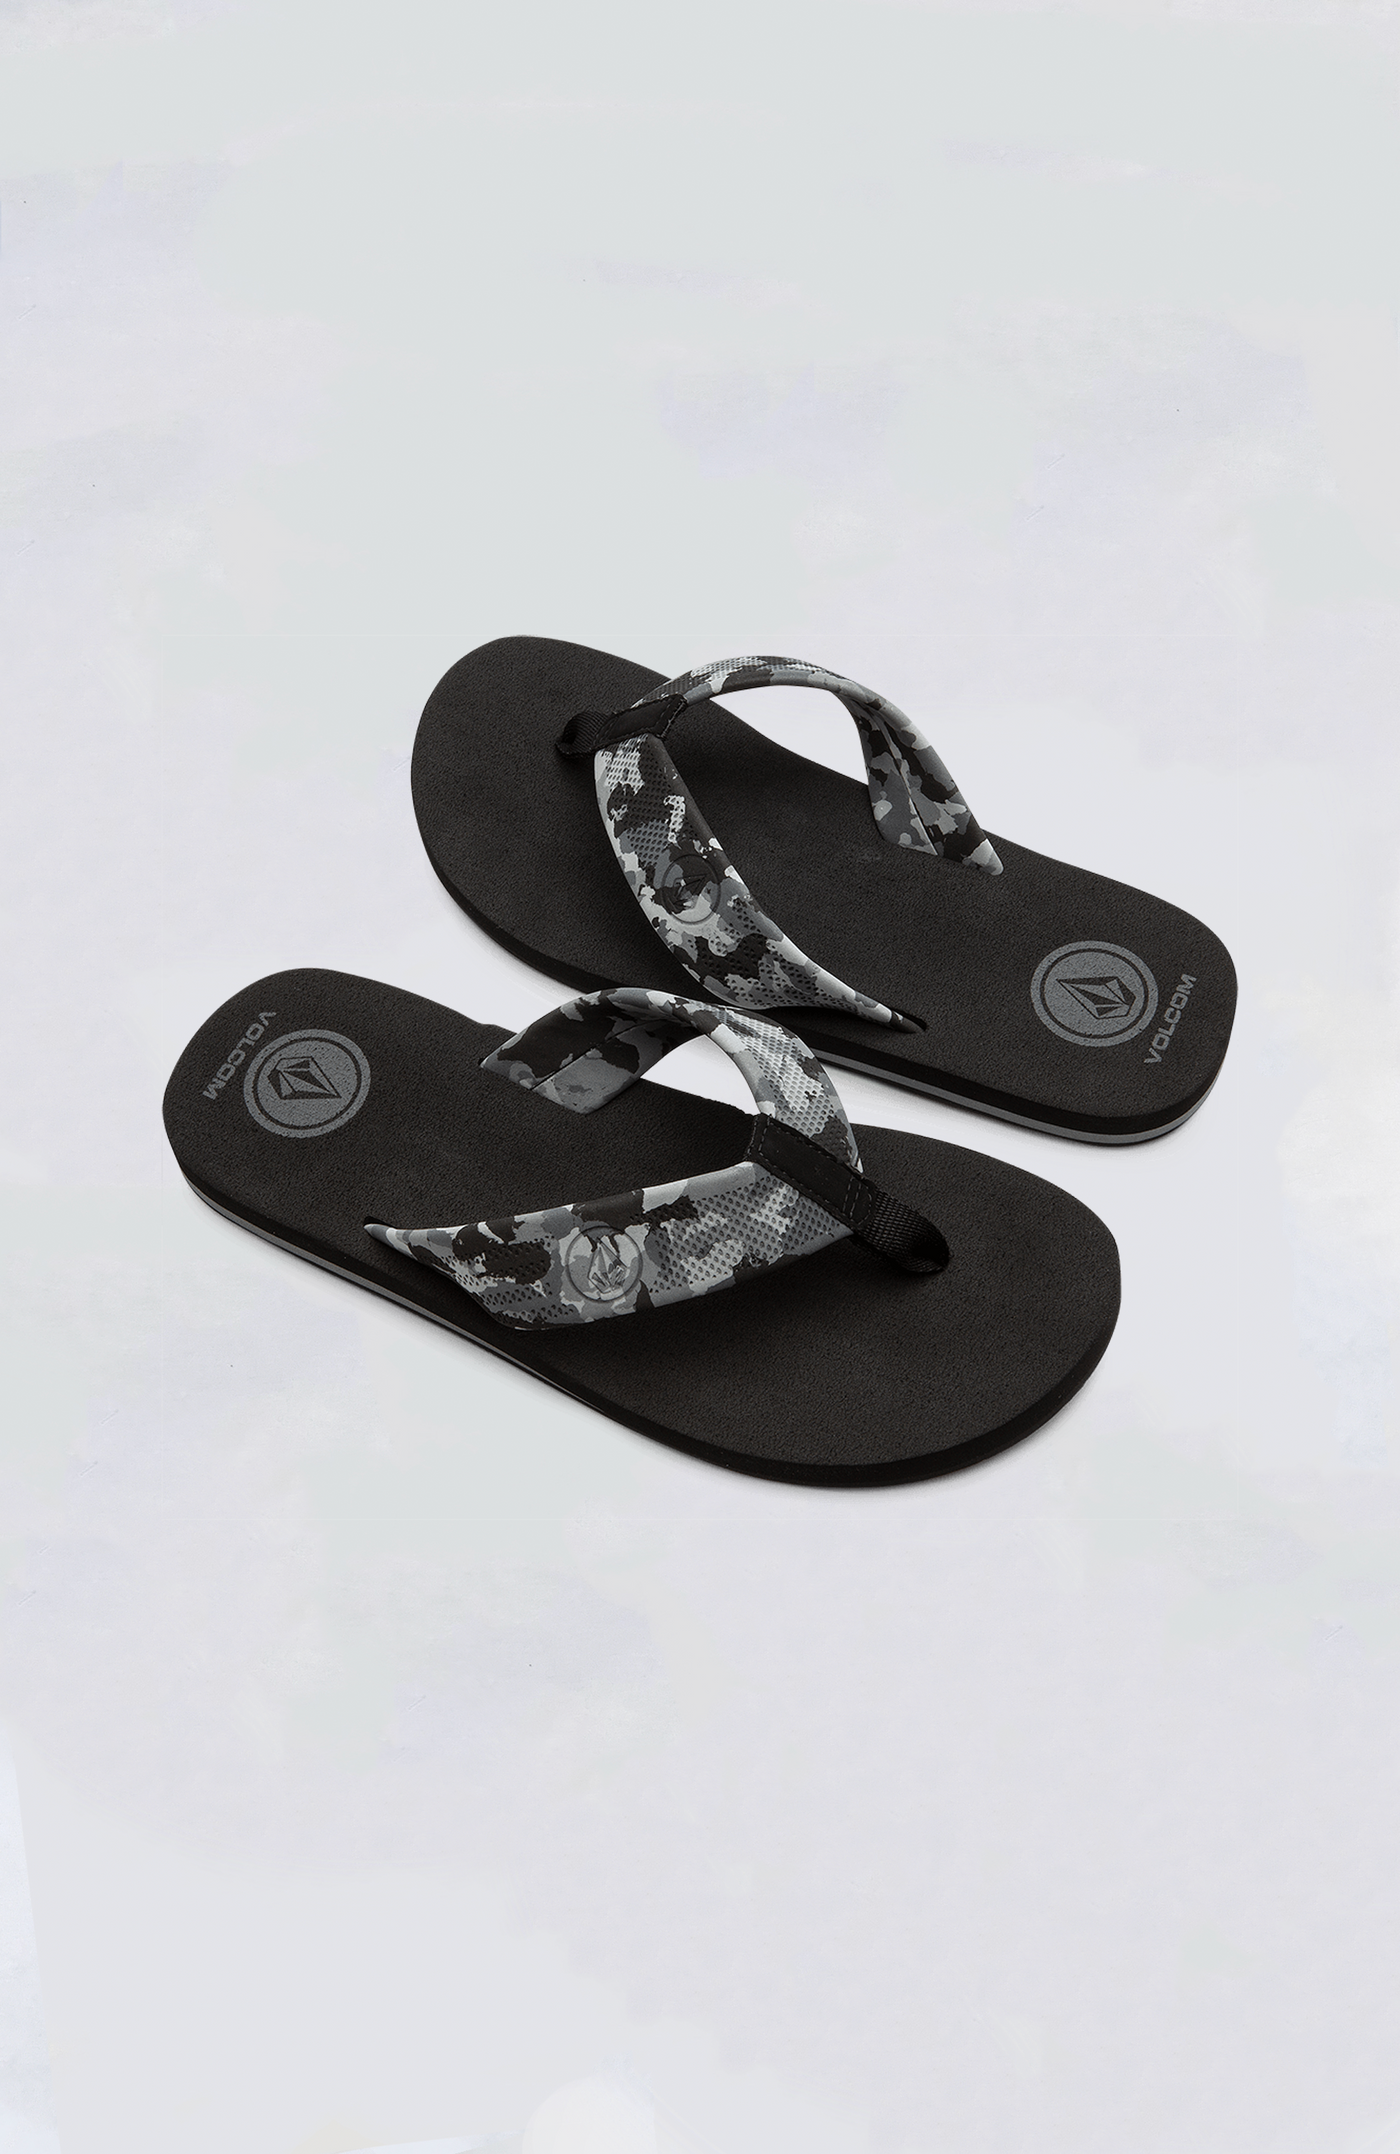 Volcom - Daycation Slippers